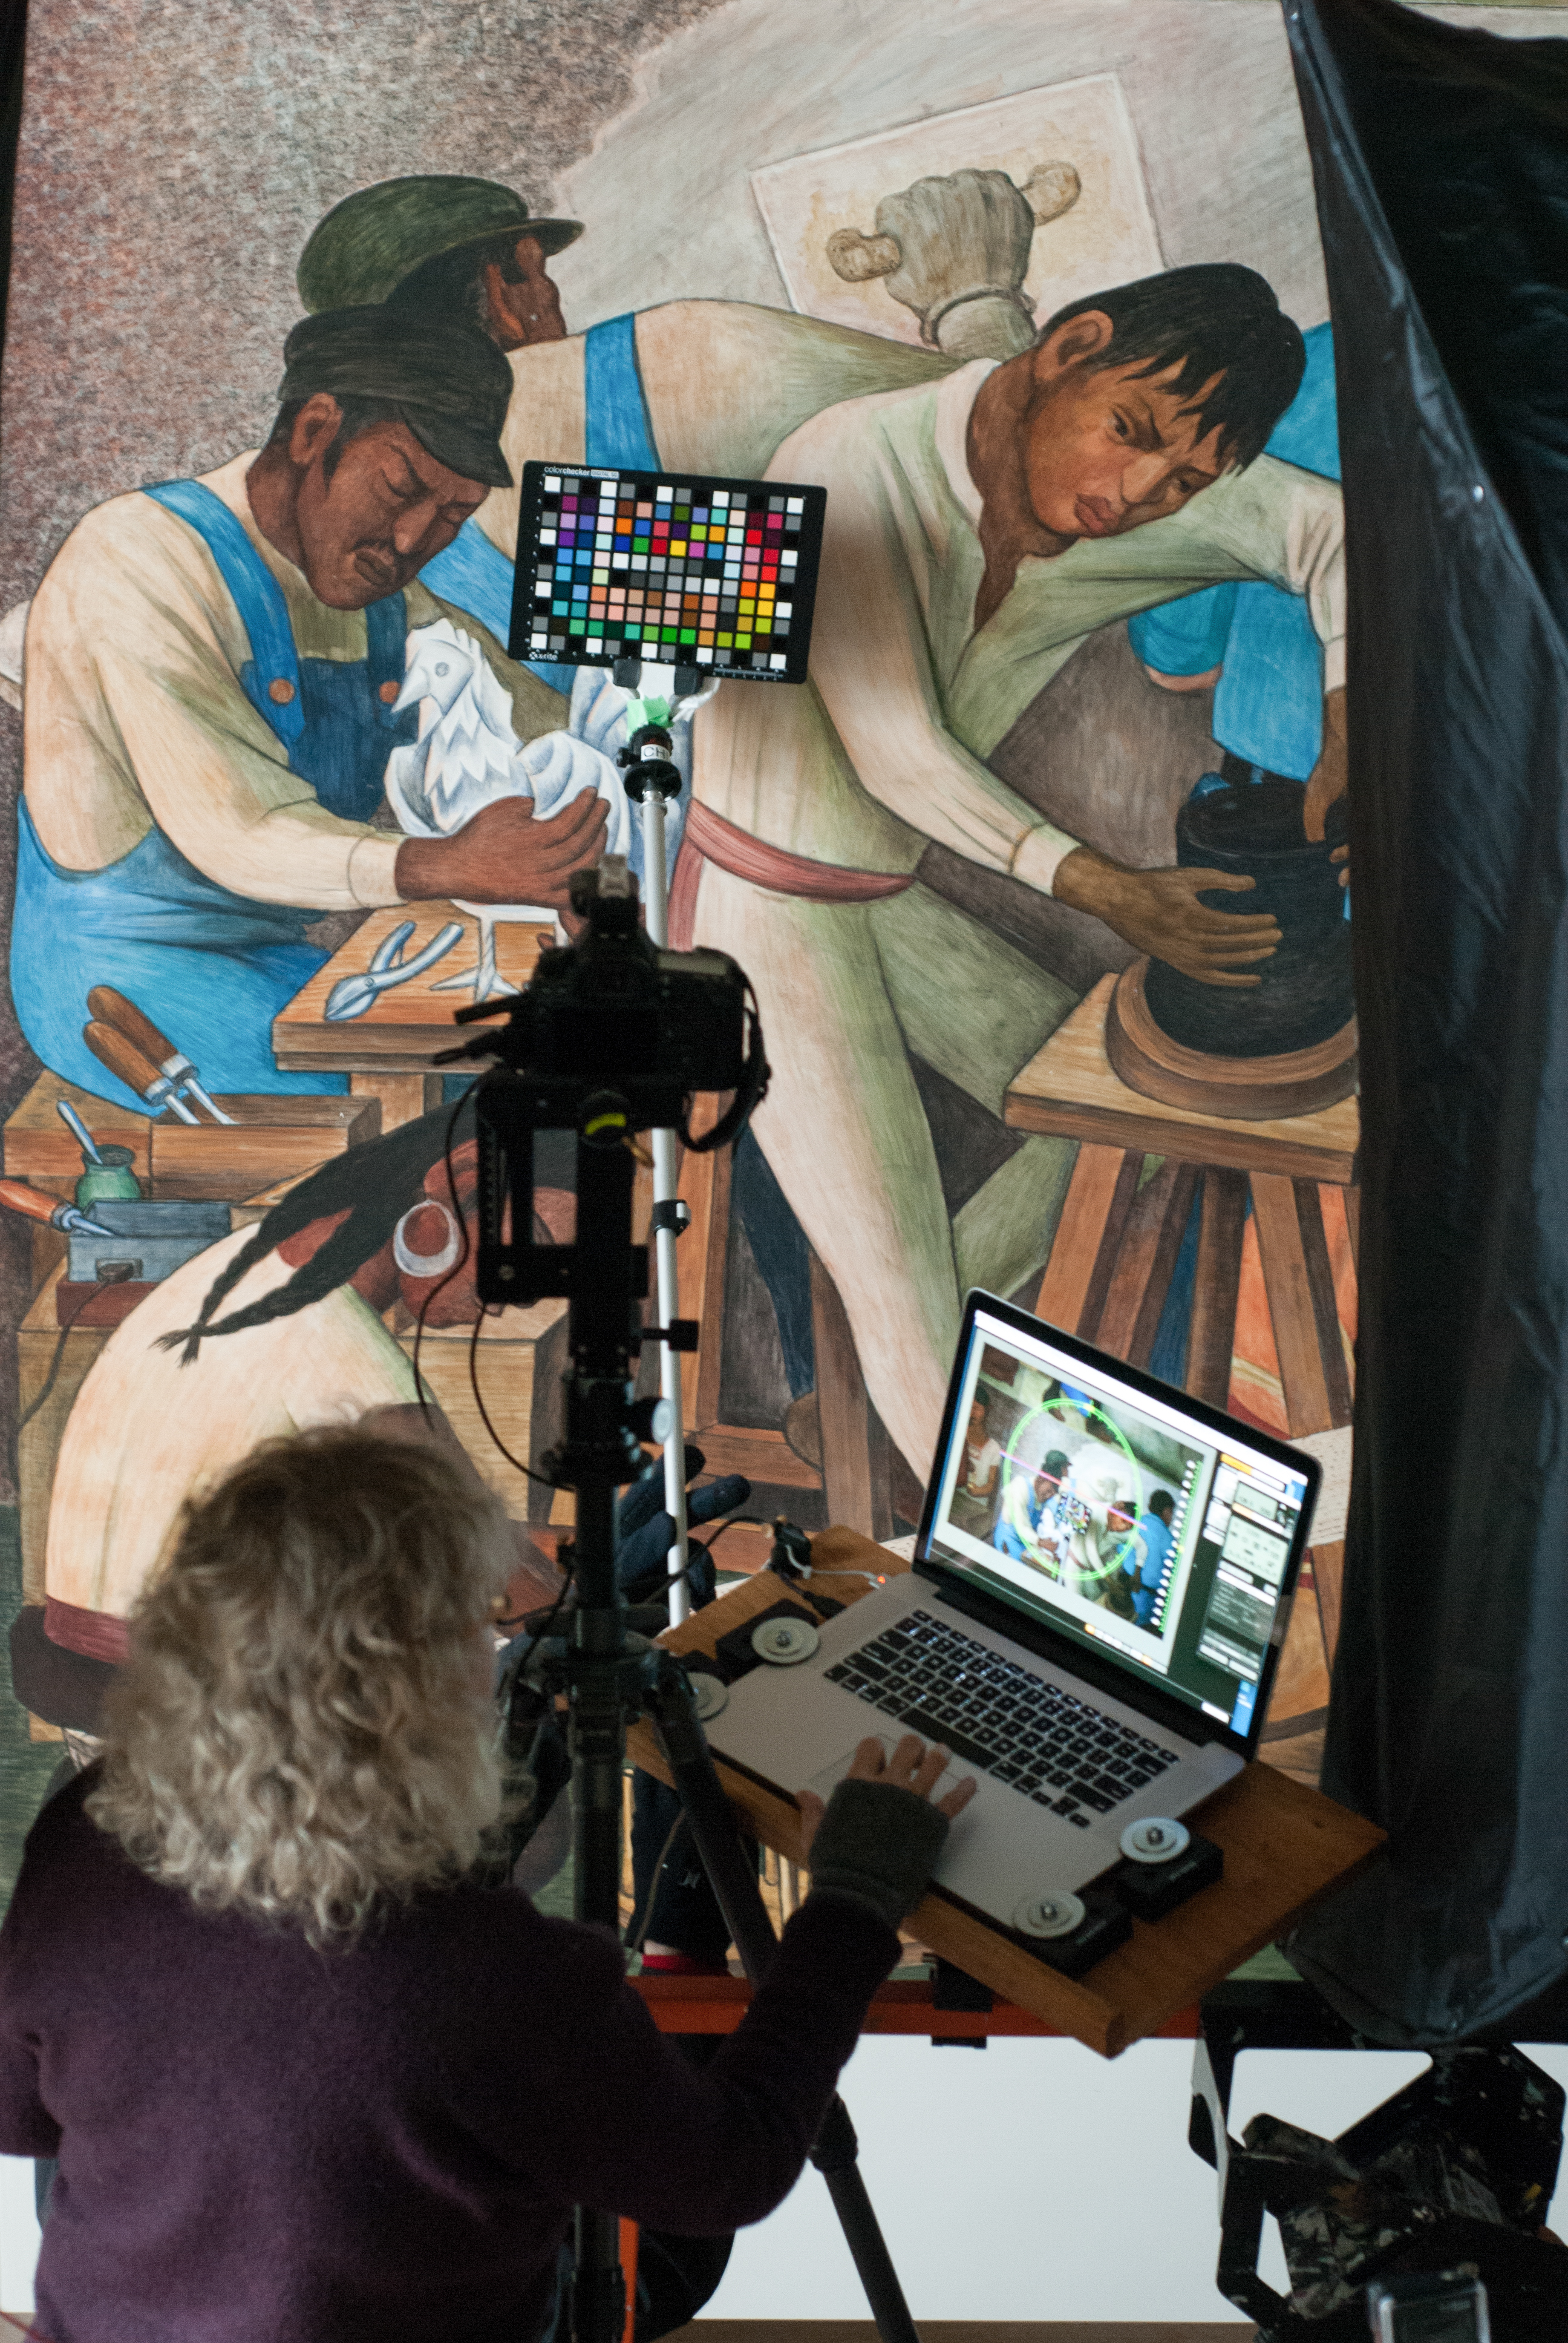 Carla Schroer of the non-profit, Cultural Heritage Imaging, setting up the laptop and camera so she can scan the Diego Rivera Mural located in the Diego Rivera Theater at the main campus in San Francisco. (Photo by Franchon Smith/ The Guardsman)